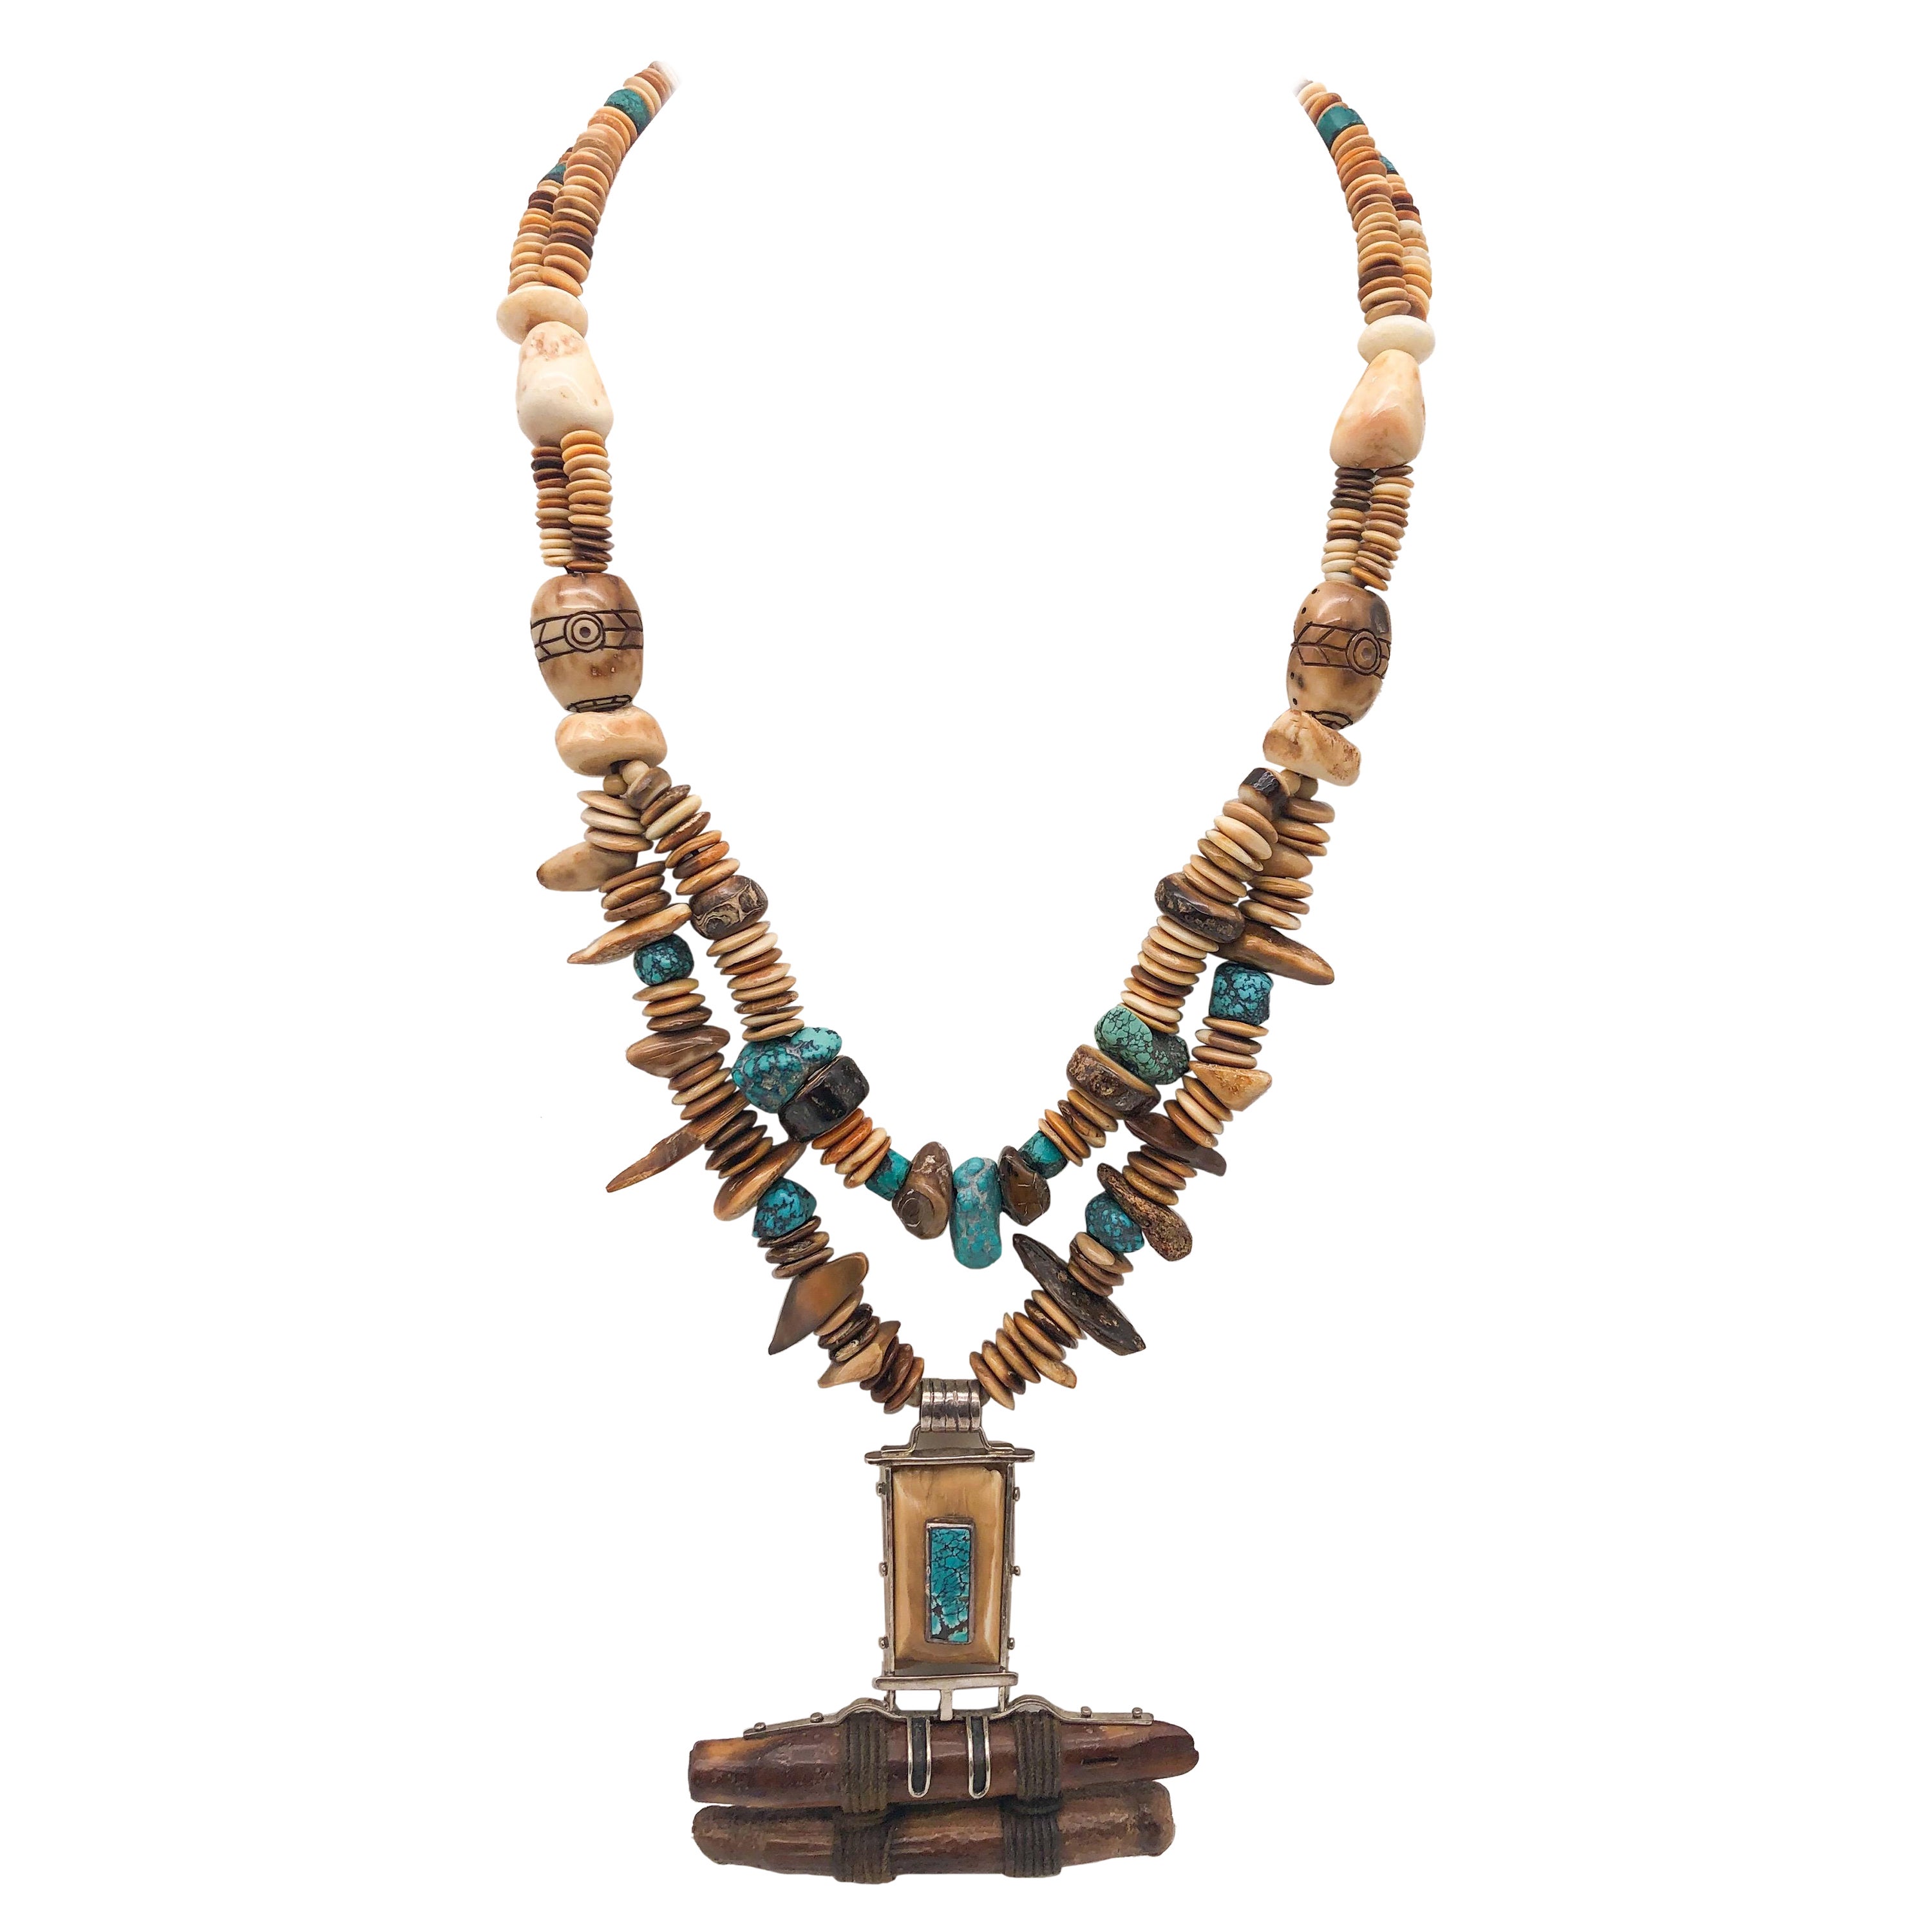 A.Jeschel Remarkable prehistoric Turquoise and Fossil Pendant necklace.